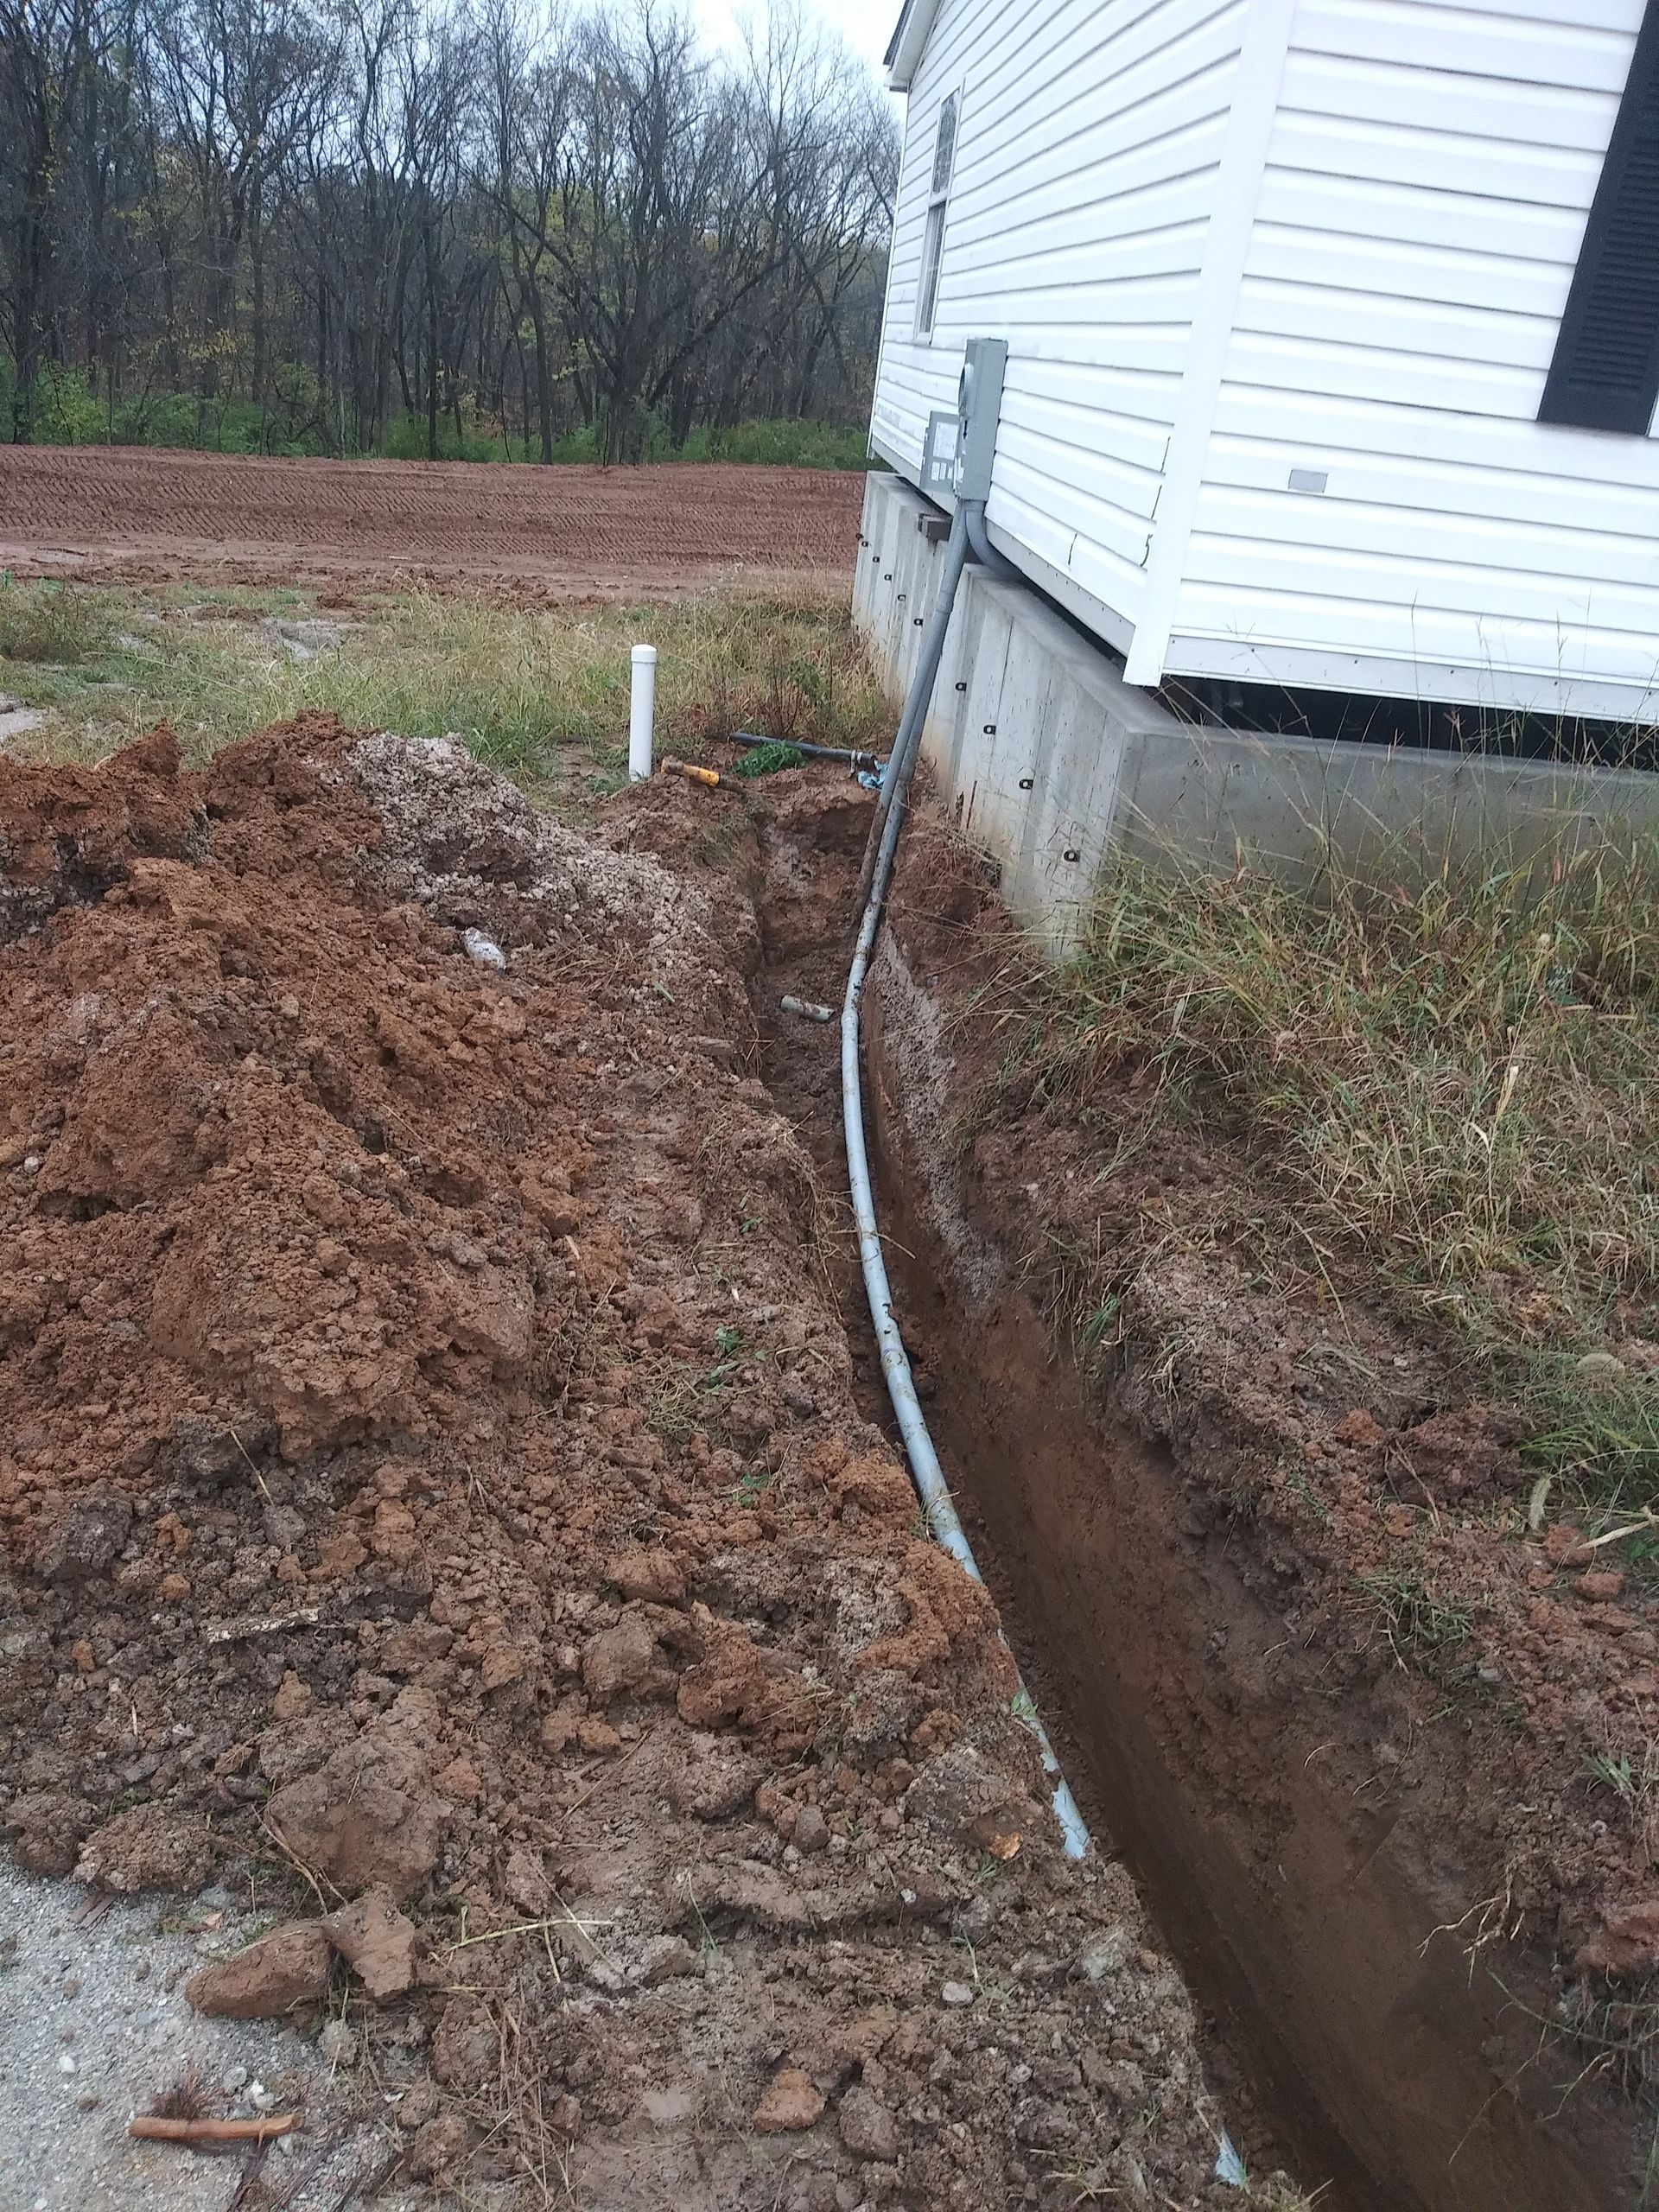 A Pipe Is Being Installed in The Dirt Next to A House | Winfield, MO | Excalibur Manufactured Housing Services LLC